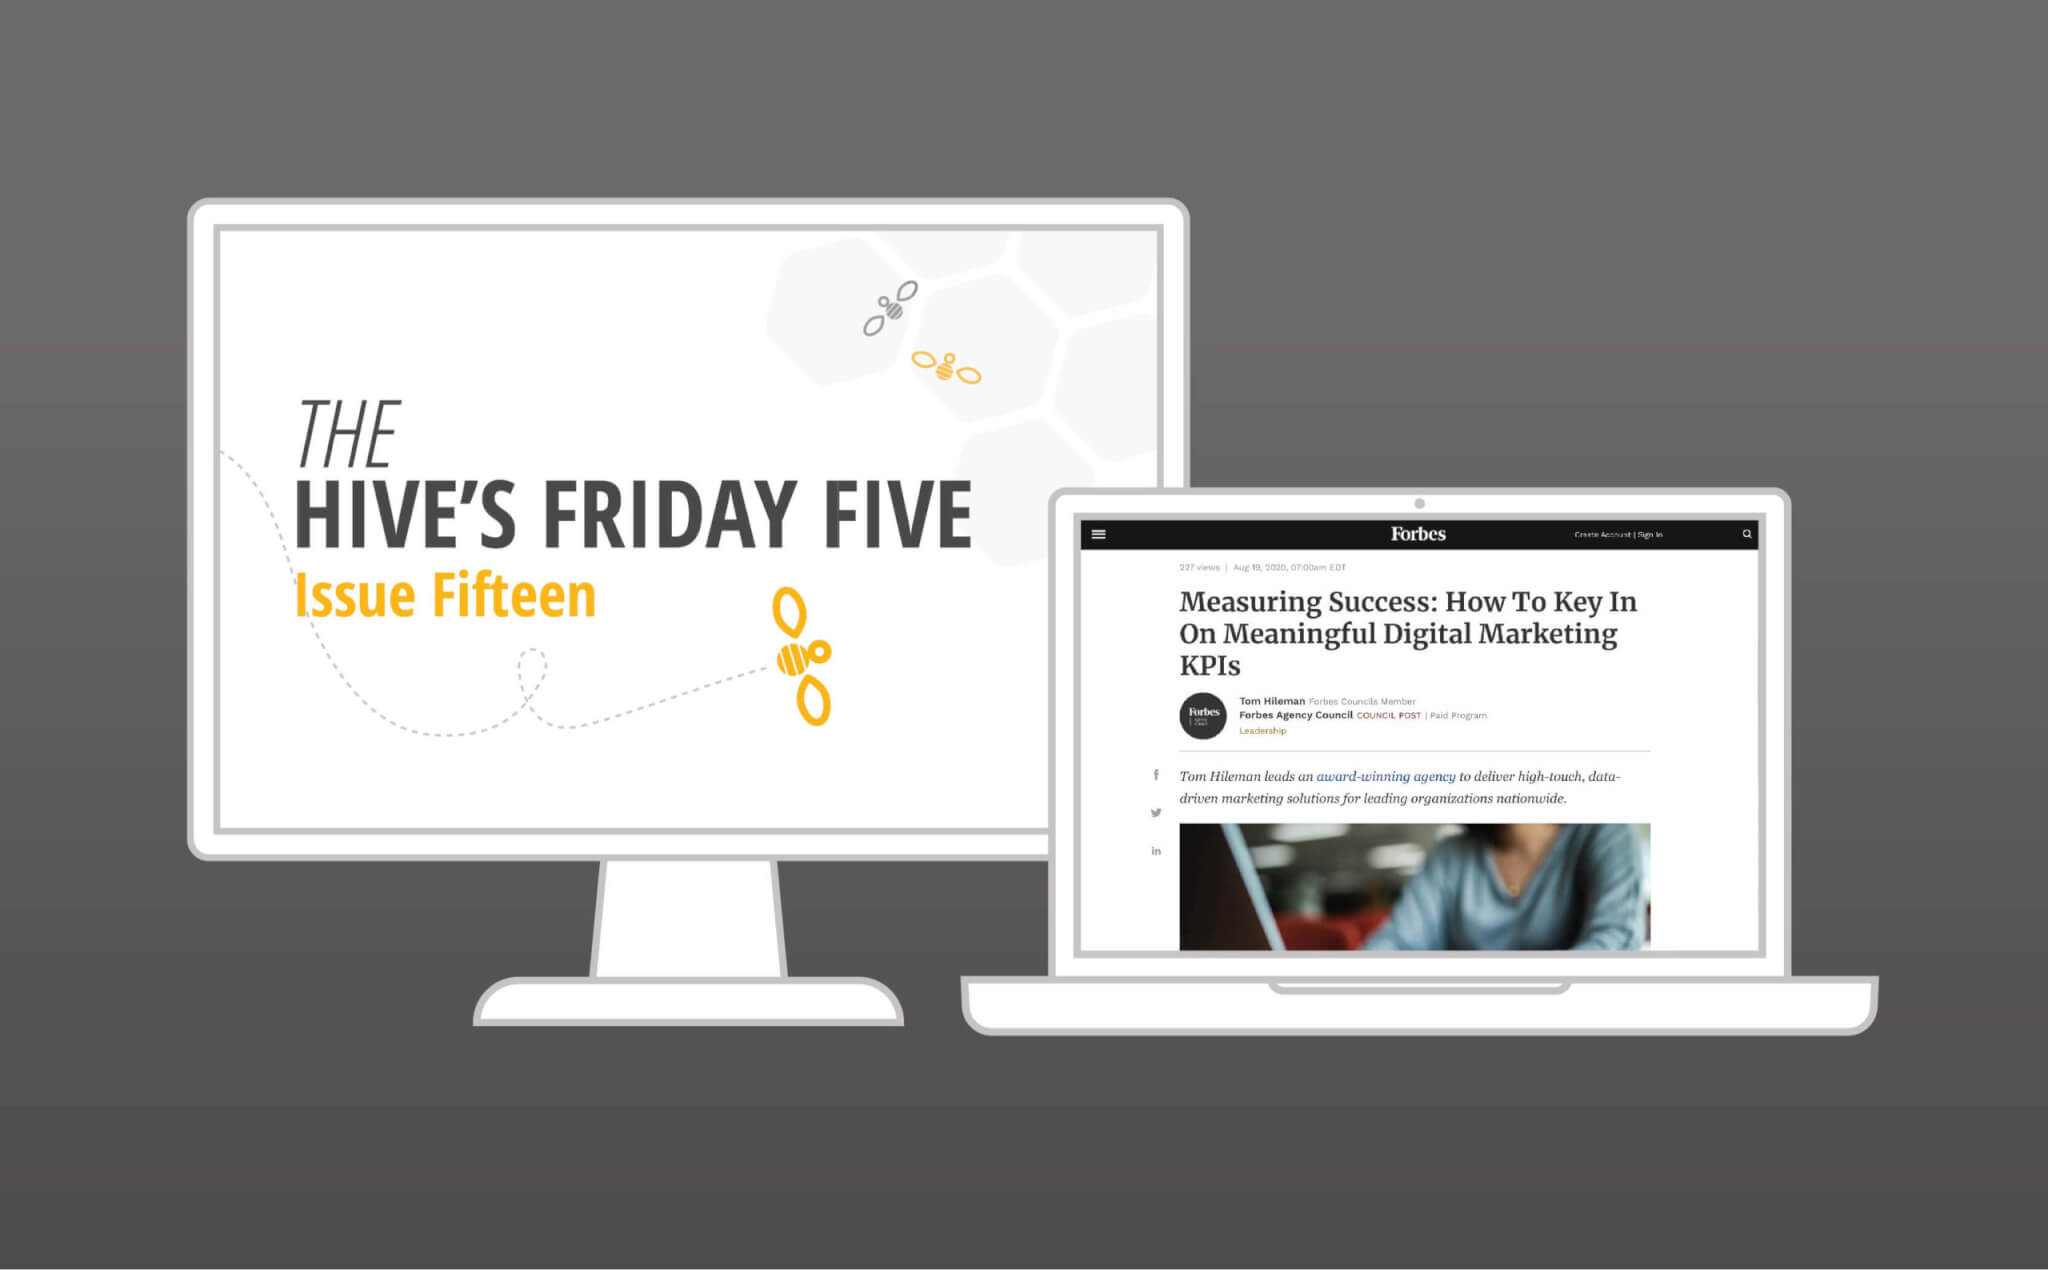 Blog-Image-The Hive’s Friday Five Issue 15